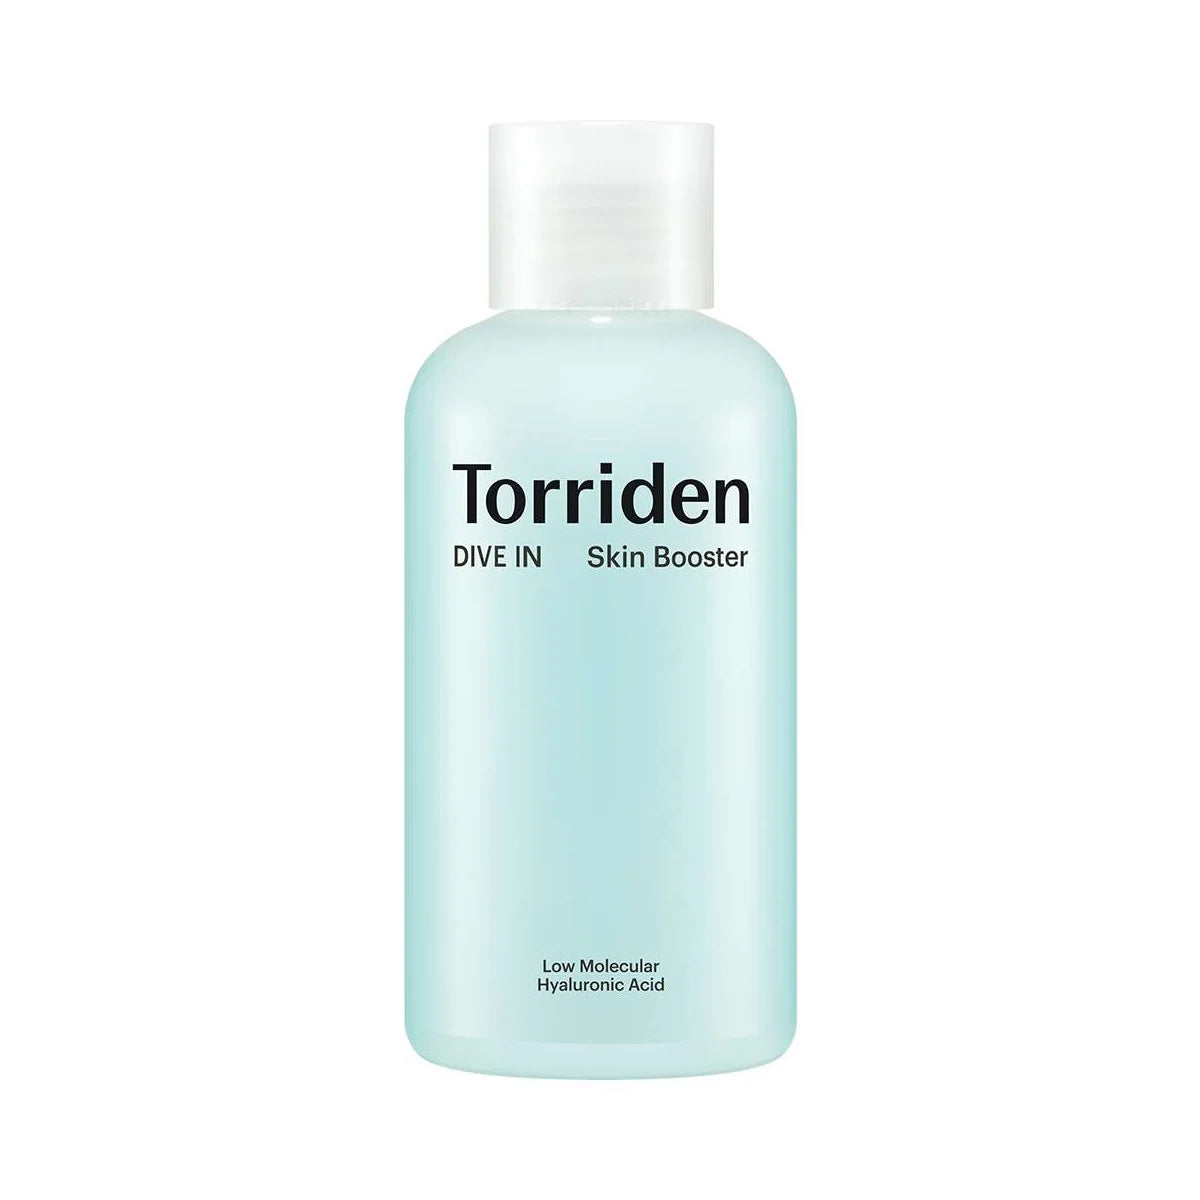 Torriden DIVE-IN Low Molecular Hyaluronic Acid Skin Booster thicker essence toner facial hydrating Korean skin care fine lines wrinkles dry dehydrated sensitive skin care K Beauty World 